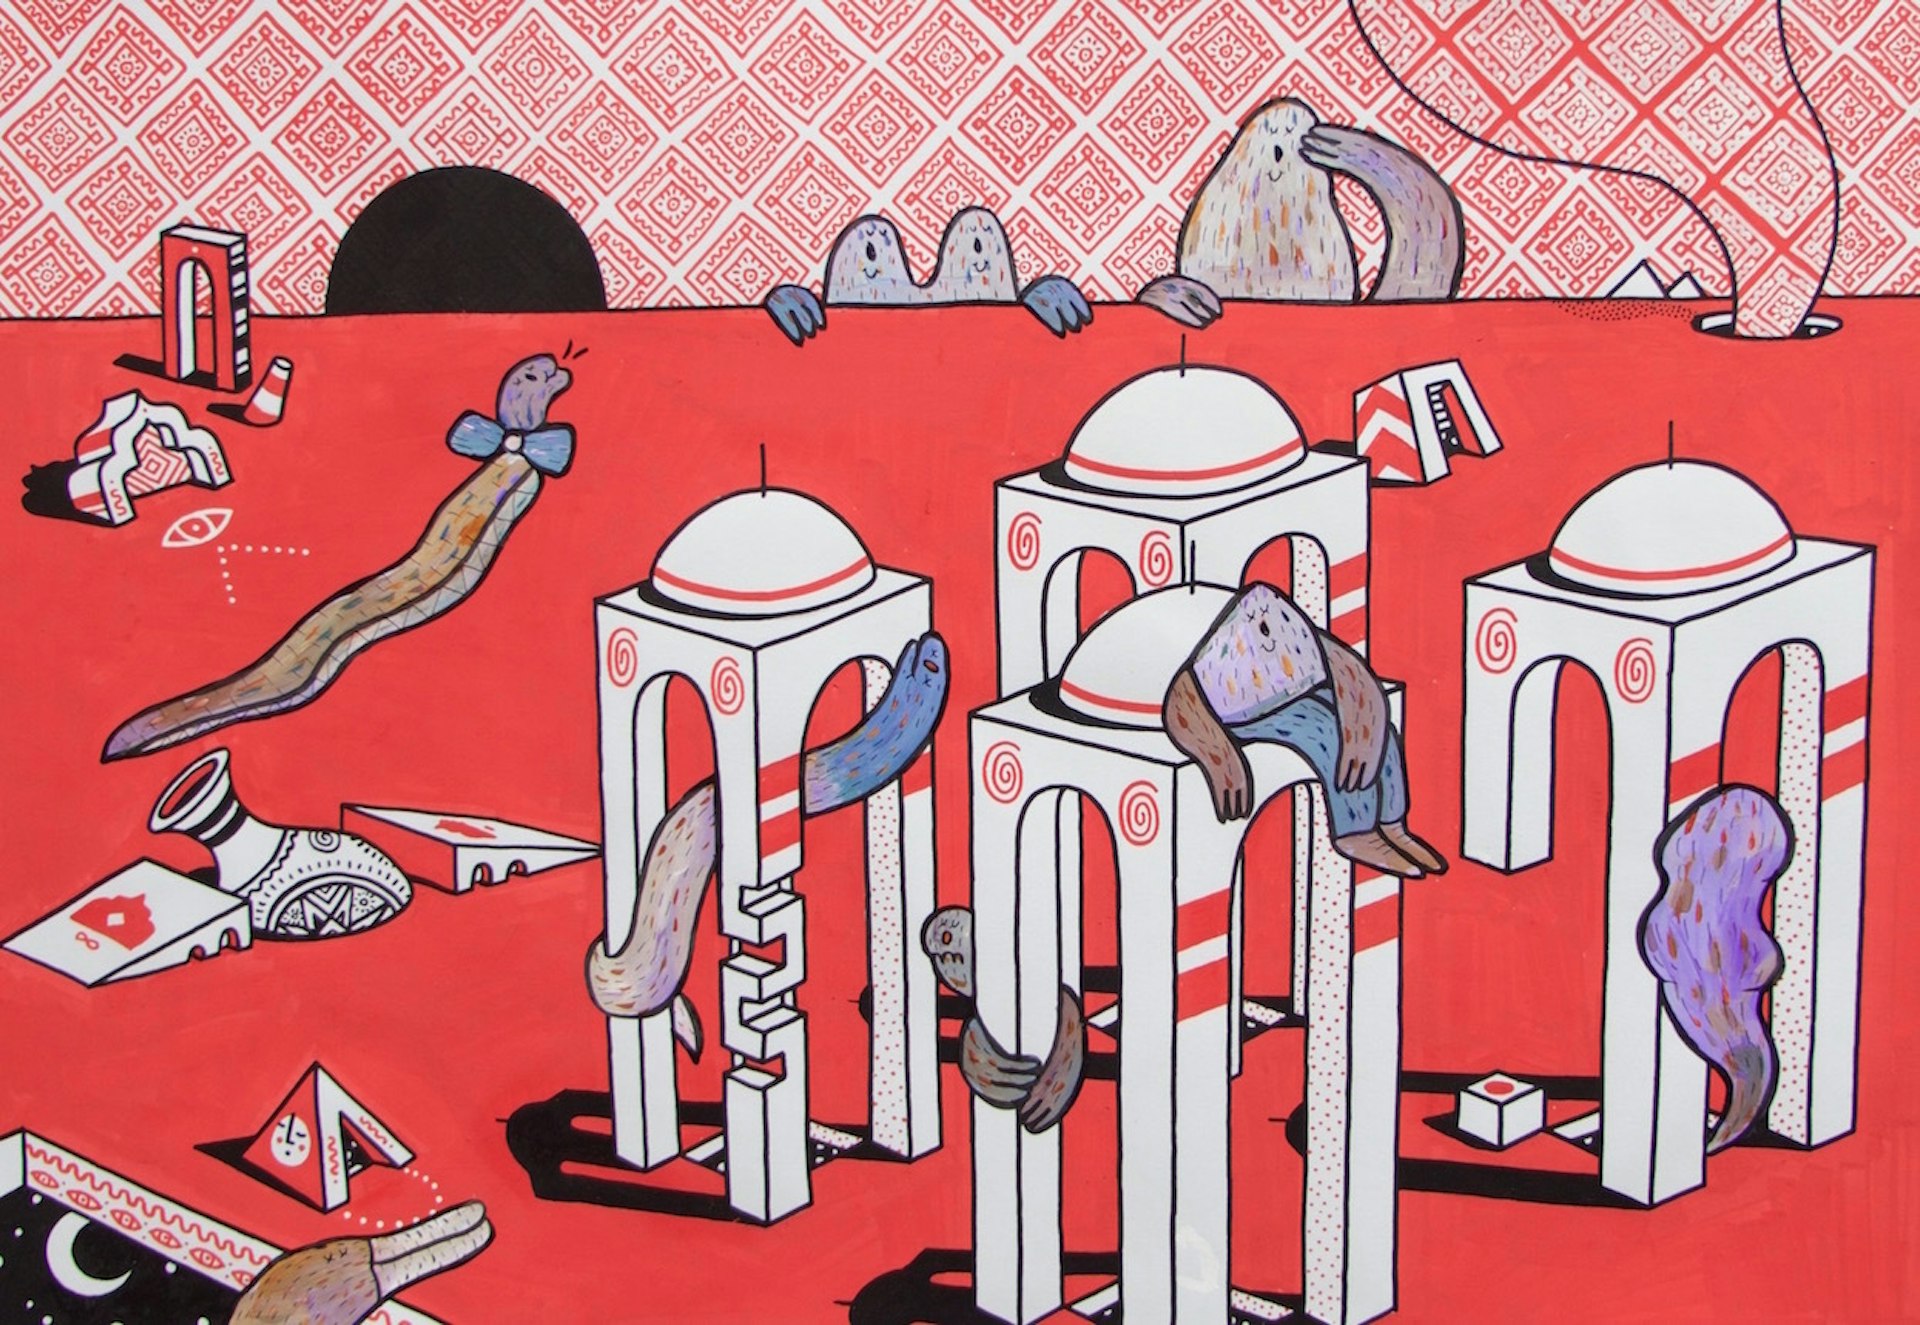 Video: New illustration collab from Lucas Beaufort and Elna